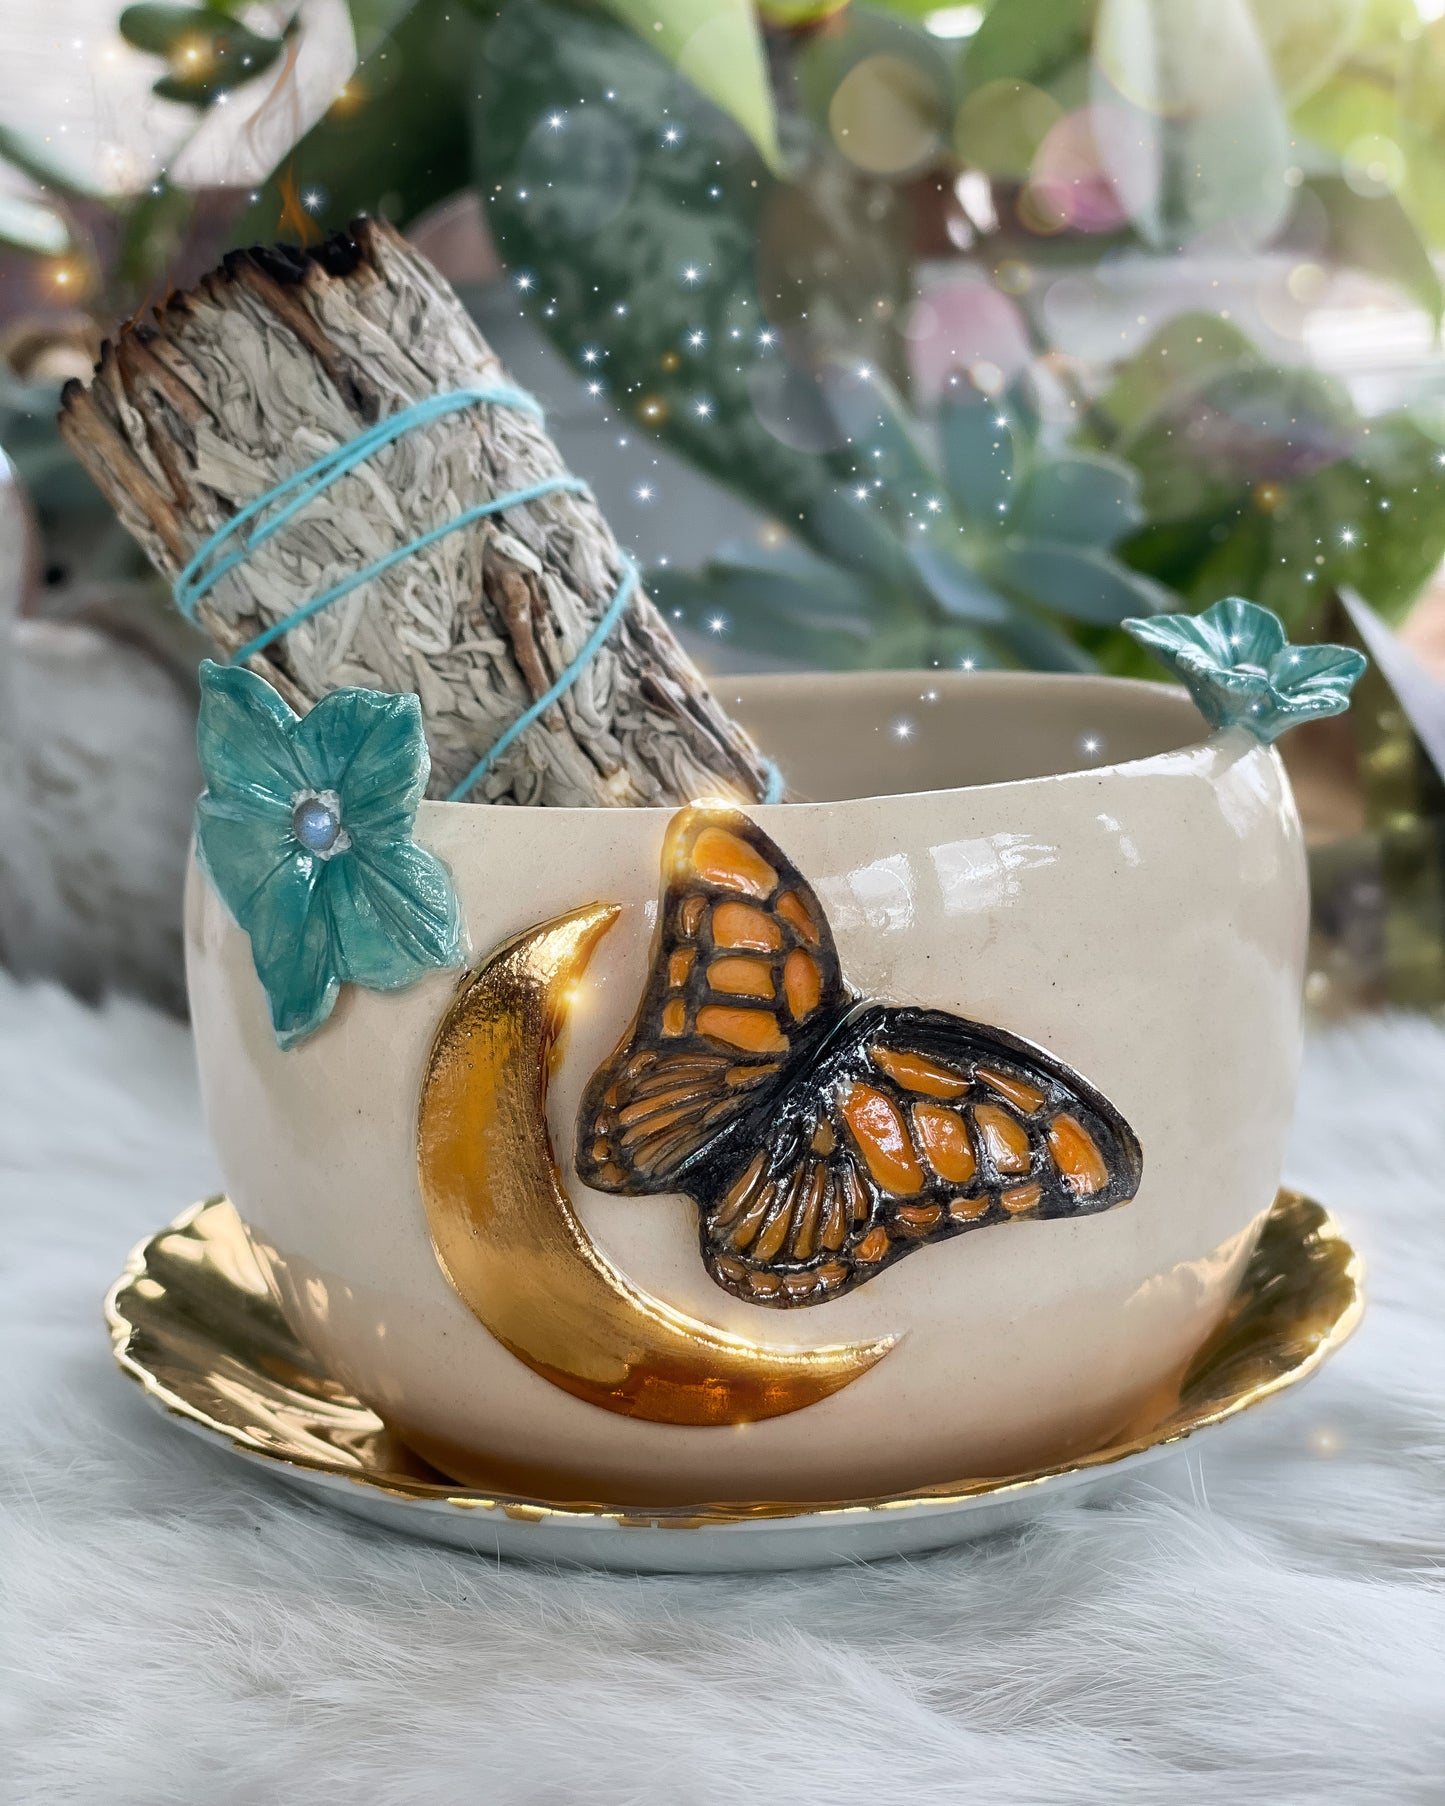 Monarch and Moon Planter or Smudge Pot